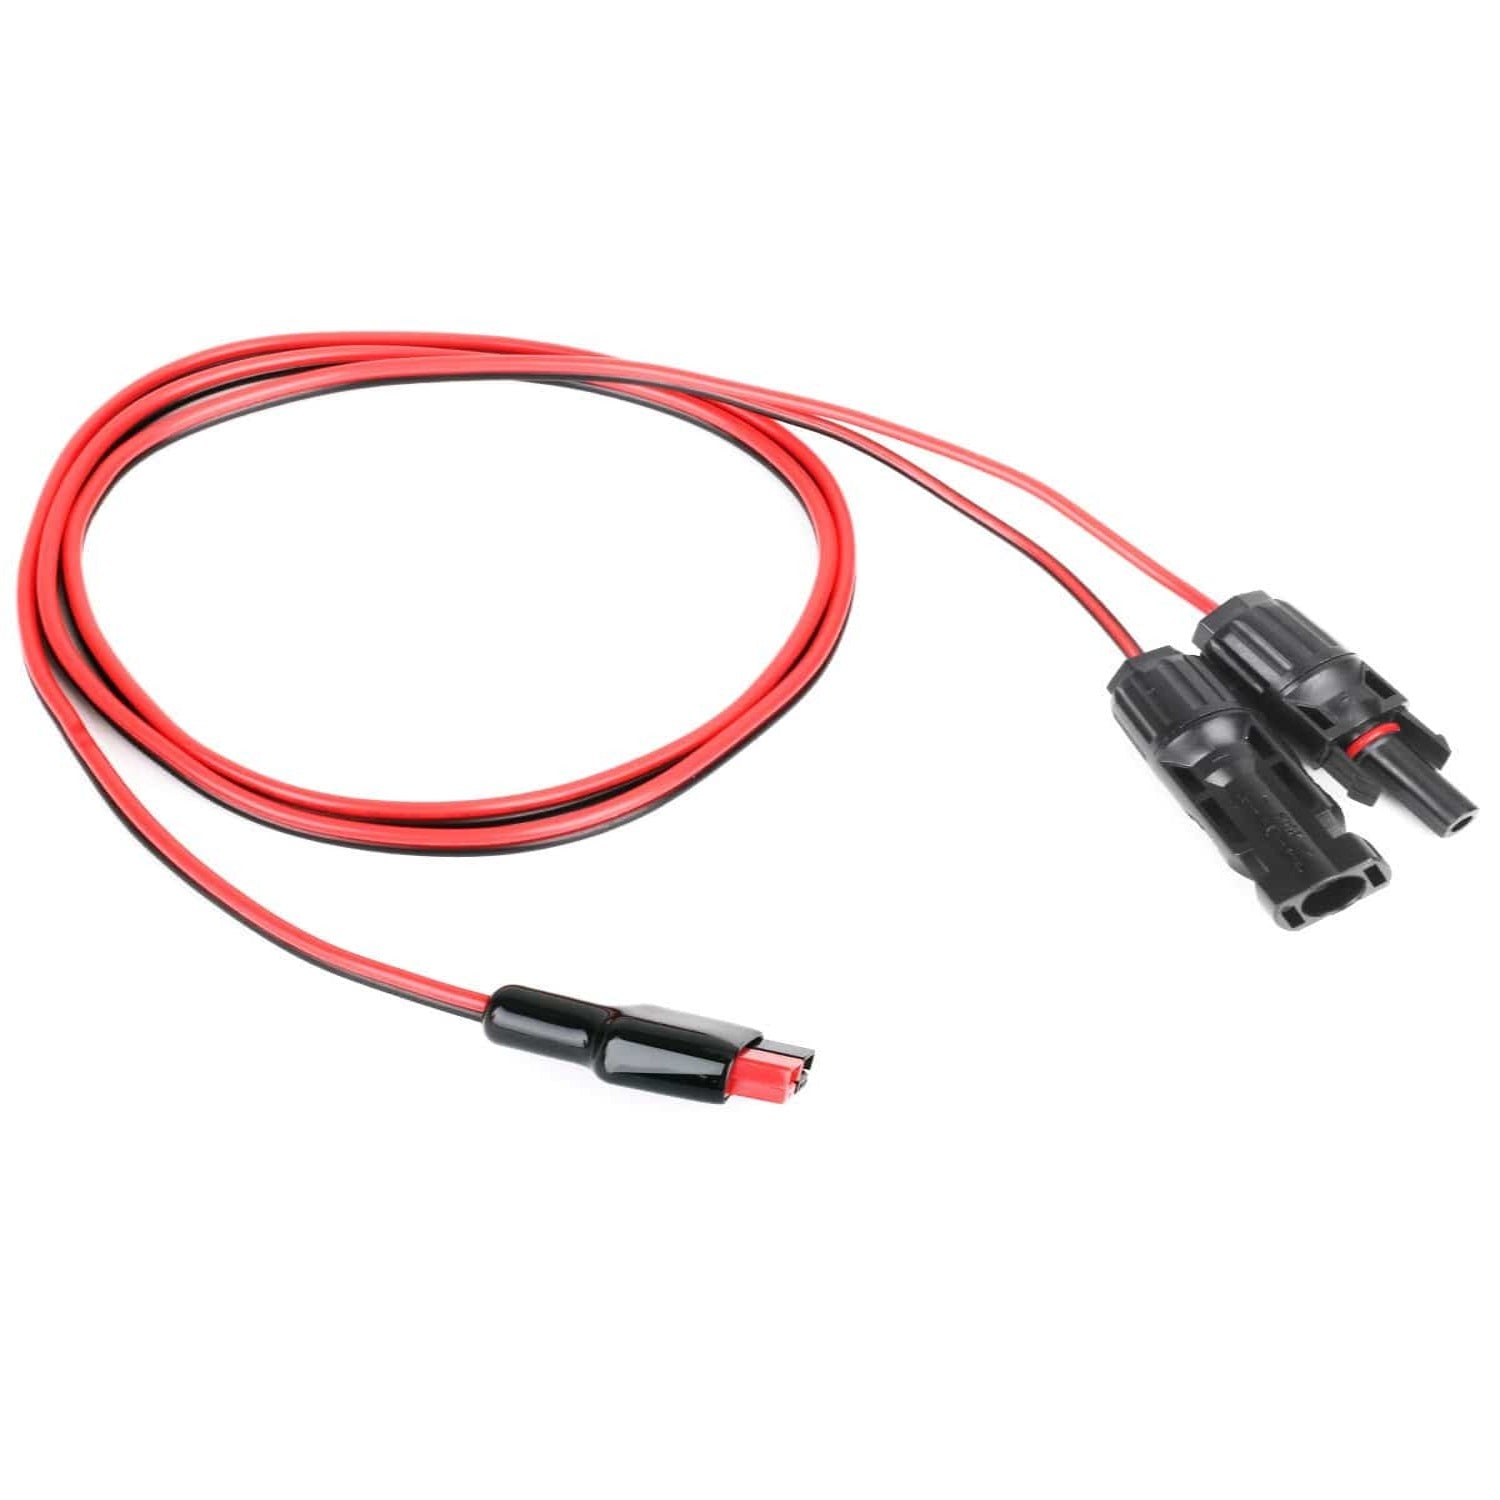 ALLPOWERS Anderson to MC-4 Connector Adapter Cable